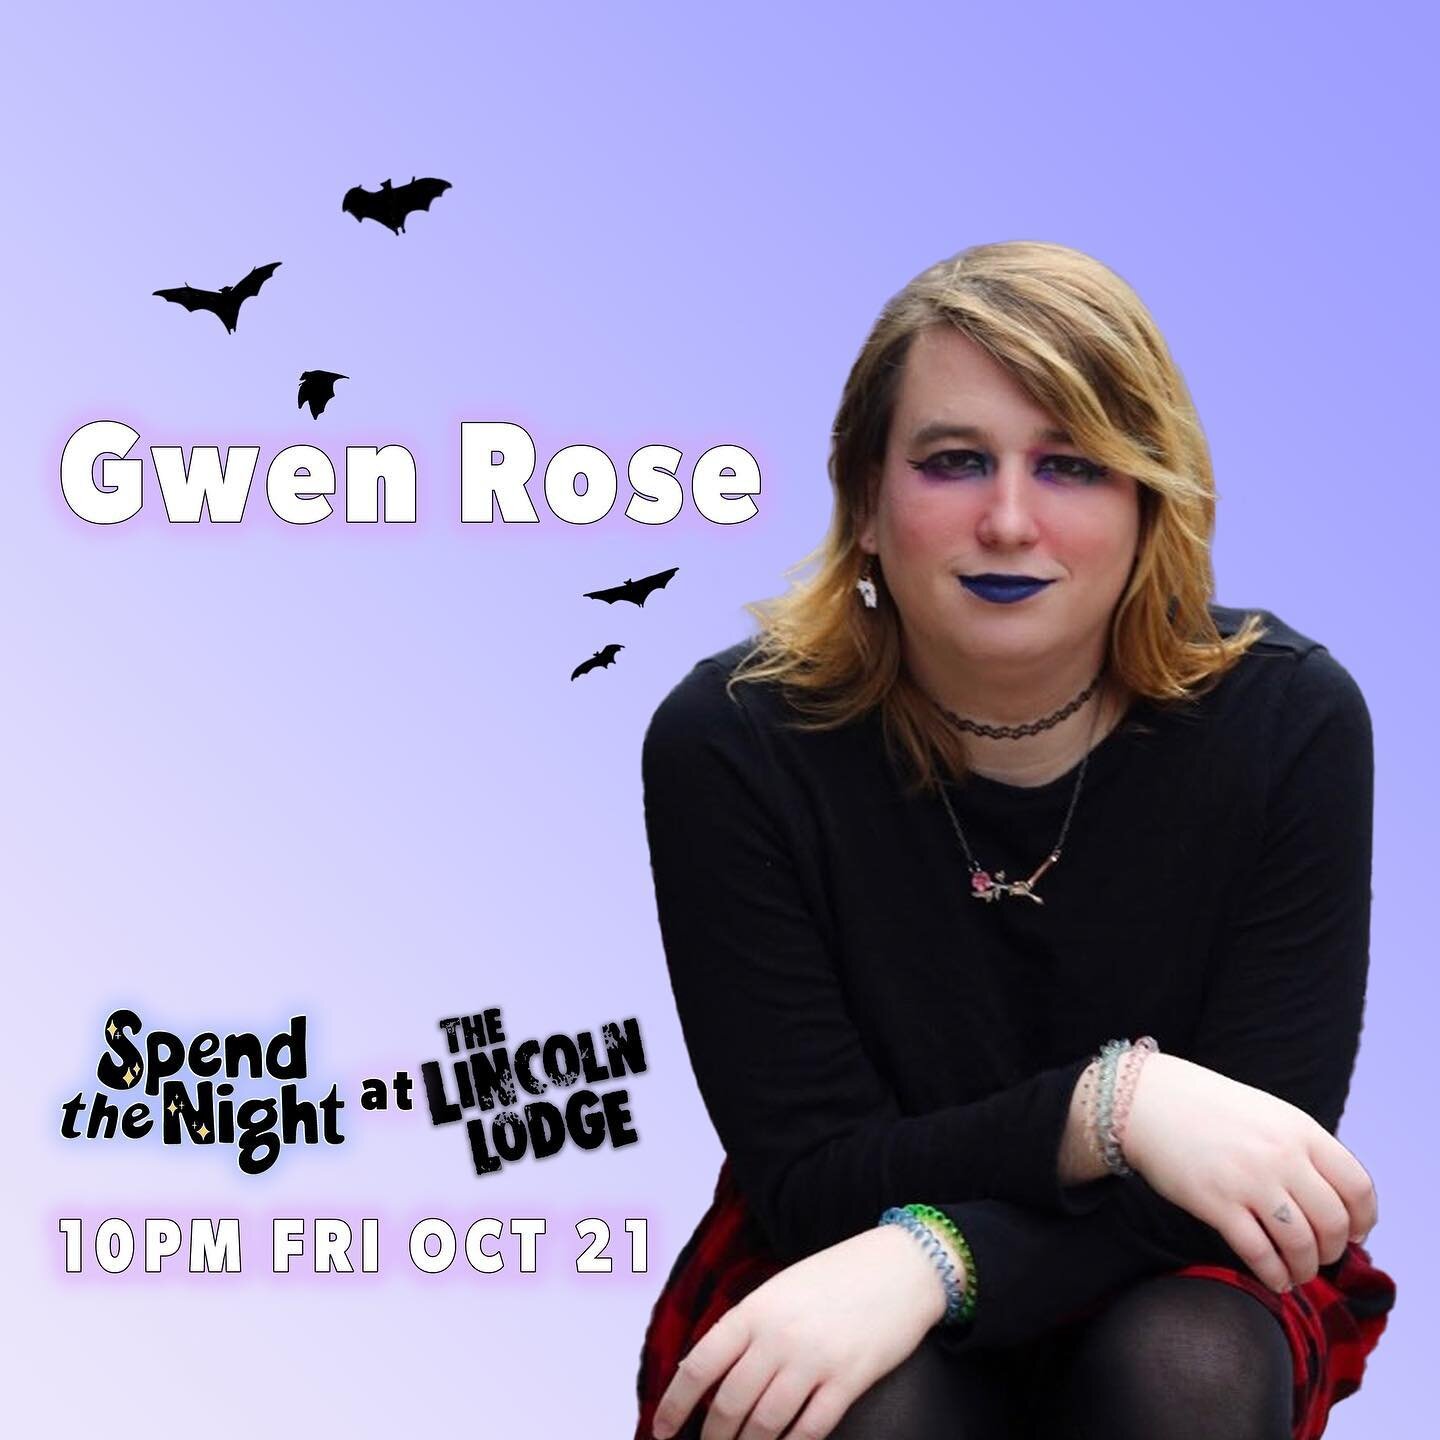 chicago, plan your lil outfits and get your tix to see Gwen Rose headlining the one halloween party comedy show you CANNOT MISS 👀🎃💕
.
.
.
.
#chicagocomedy #chicagoqueercomedy #chicagohalloween